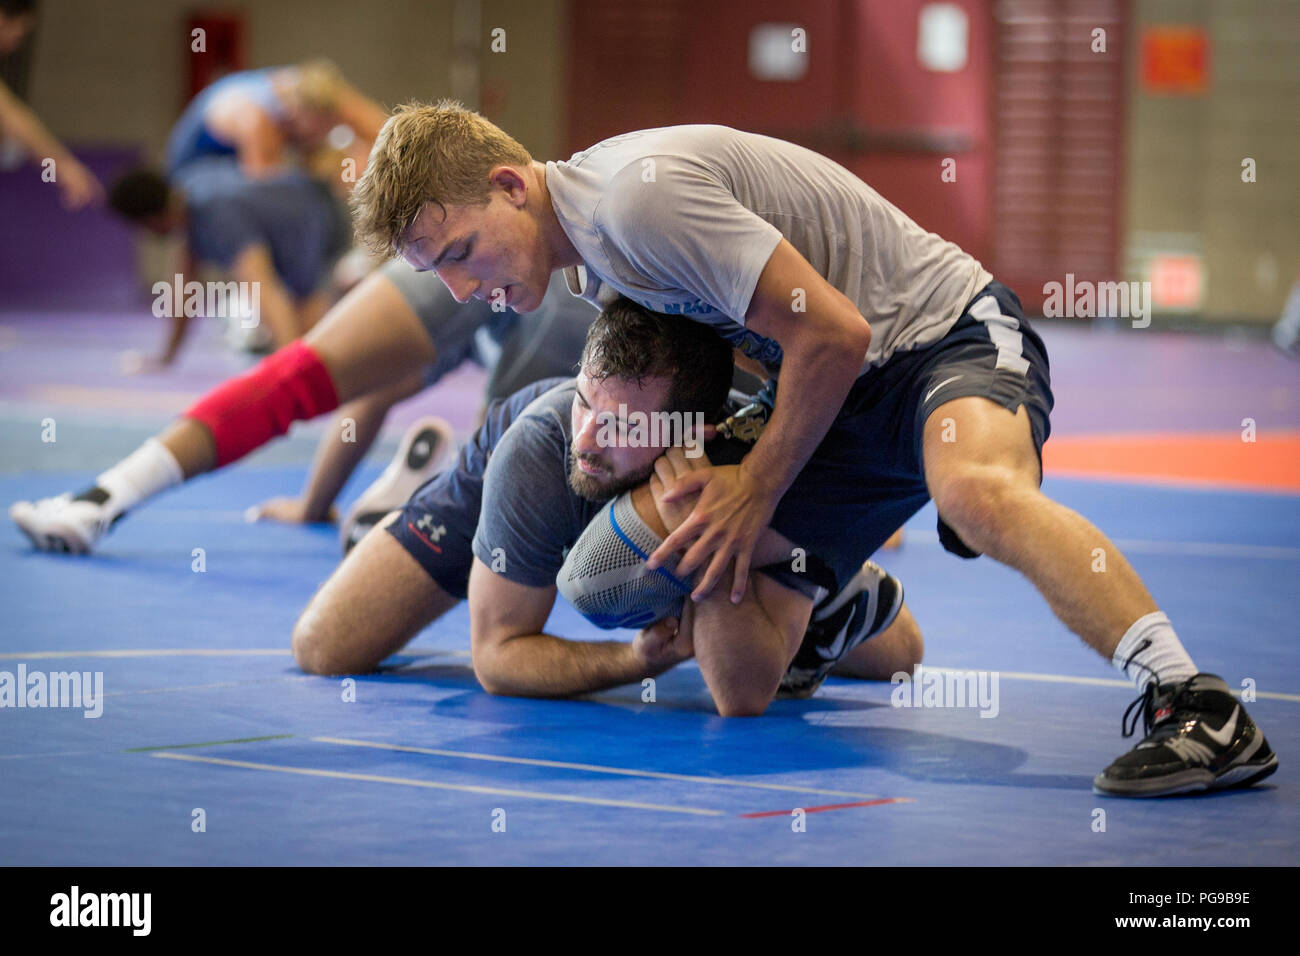 Micky Philippi, top, and Zayn Richards, wrestlers, USA Wrestling Men’s Freestyle World Team, train at the 43 Fitness Center at Marine Corps Base Camp Pendleton, California, Aug. 20, 2018. Today was the first day of a two-week training camp in which wrestlers learned different maneuvers and how to improvise when caught in troublesome positions. (U.S. Marine Corps photo by Lance Cpl. Betzabeth Y. Galvan Stock Photo